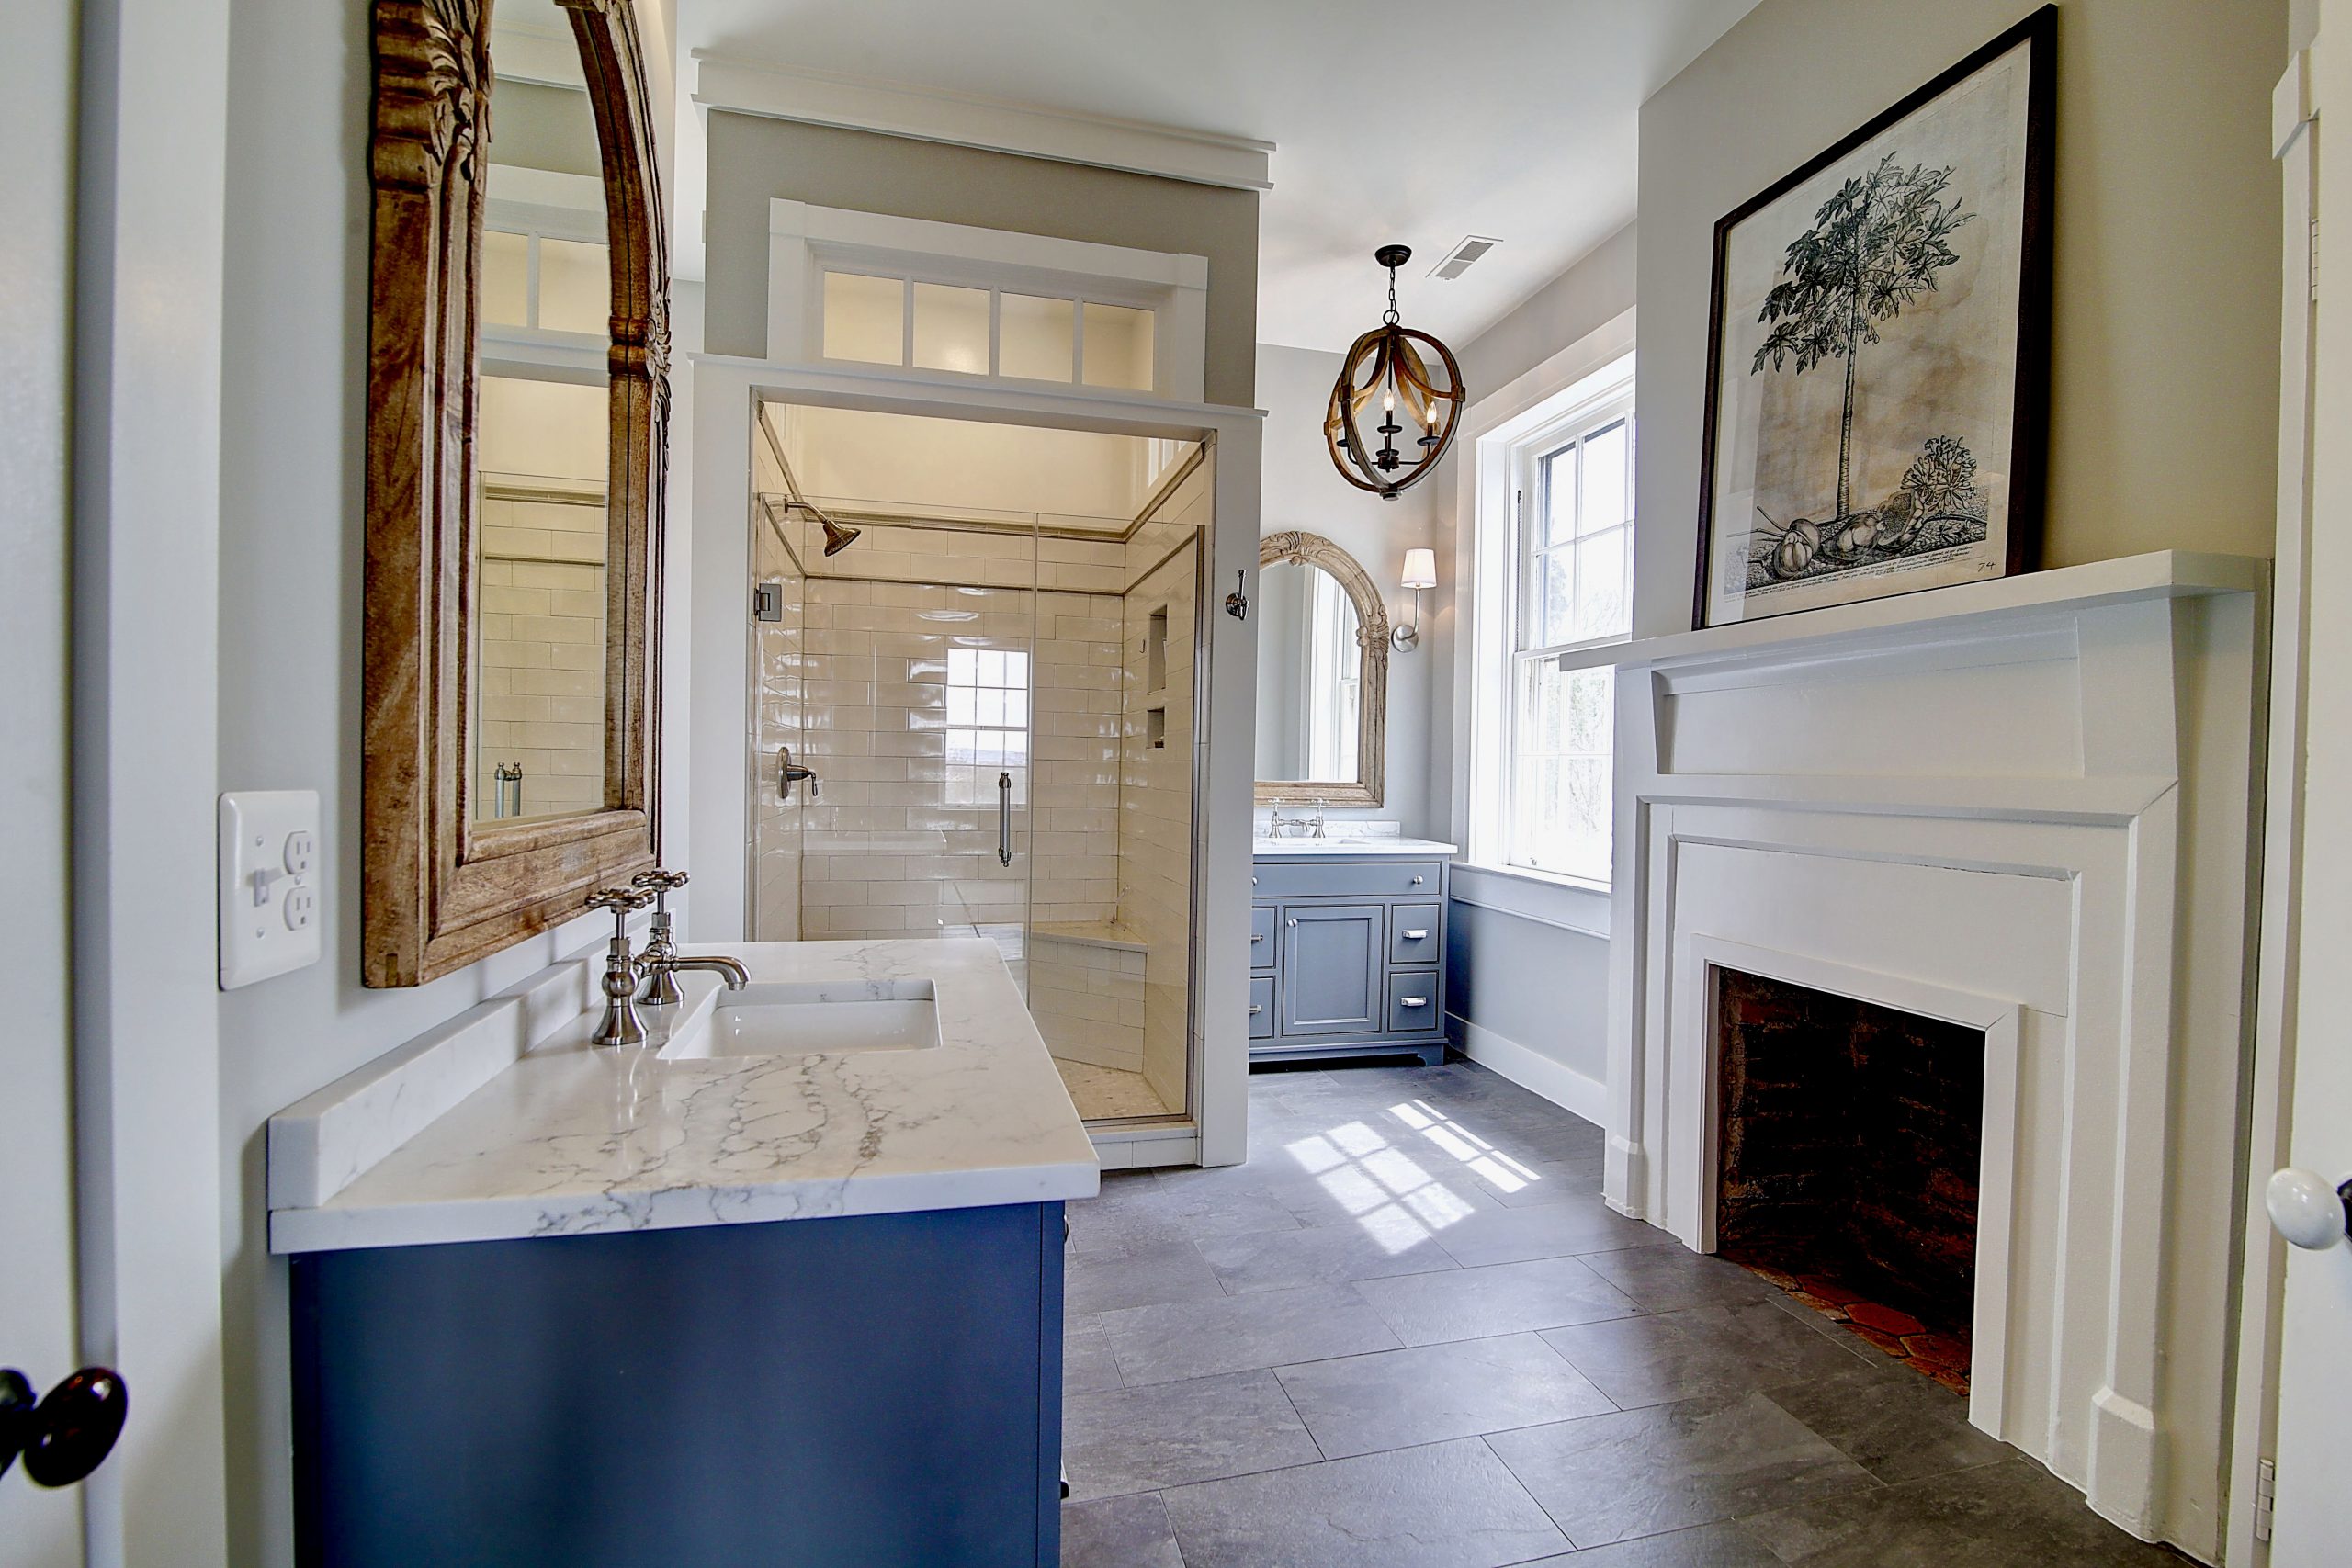 renovated bathroom with fireplace and white mantel